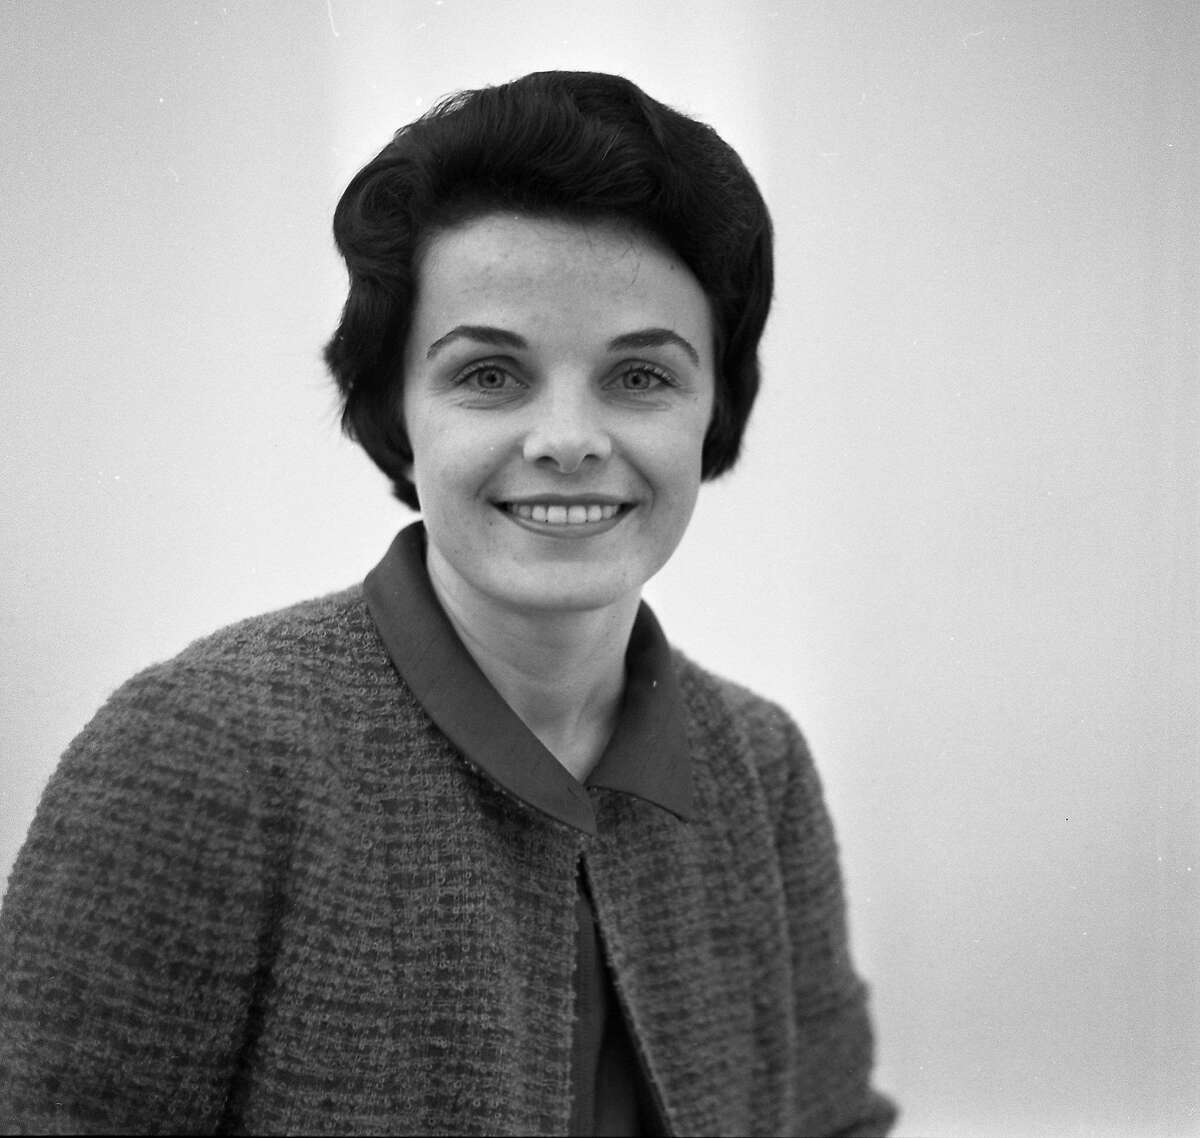 Dianne Feinstein, member of the California Women's Board of Terms and Paroles, June 24, 1964